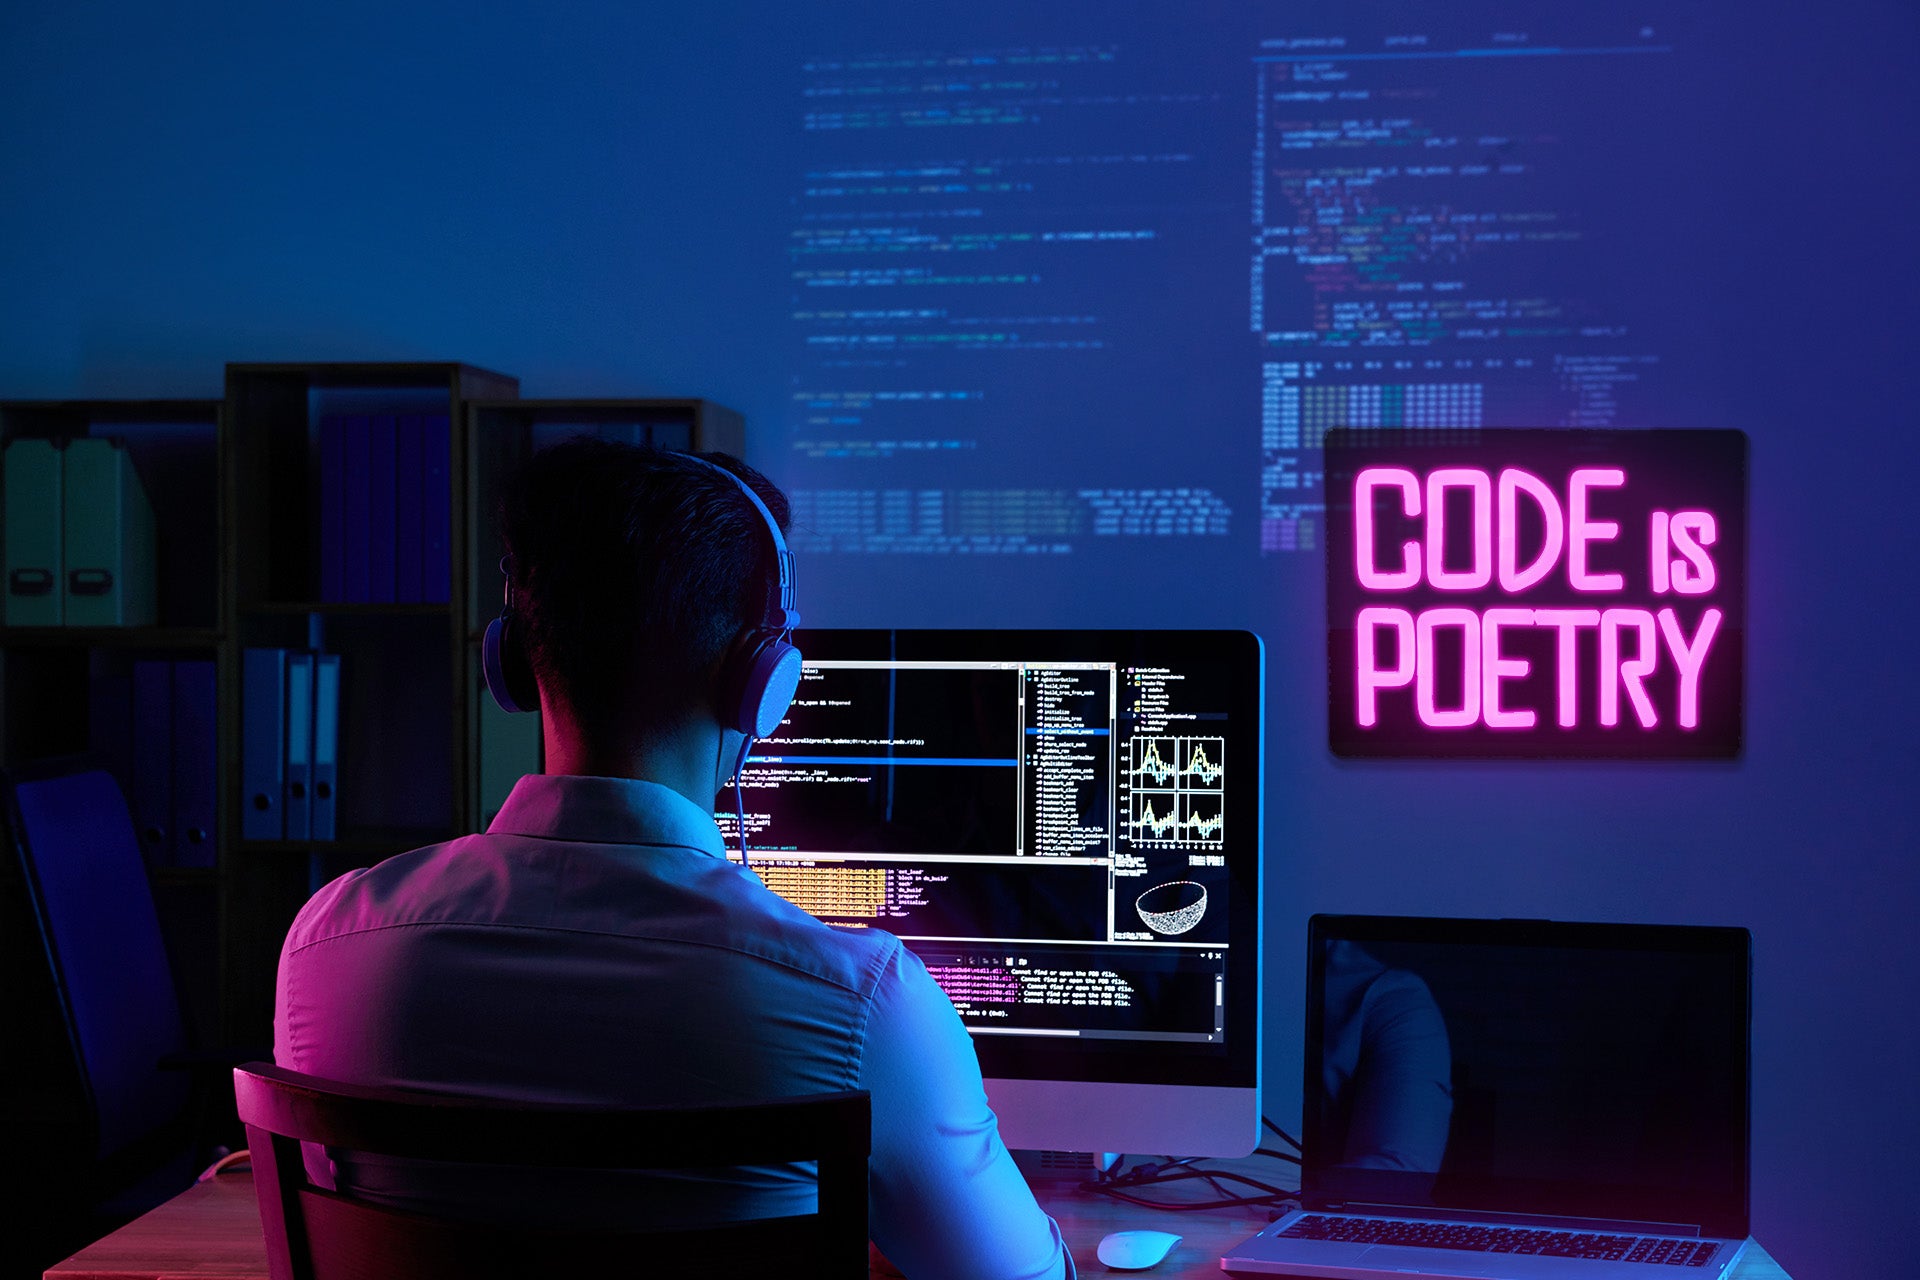 A developer sits in front of a computer with a neon sign on the wall that reads "Code is Poetry"